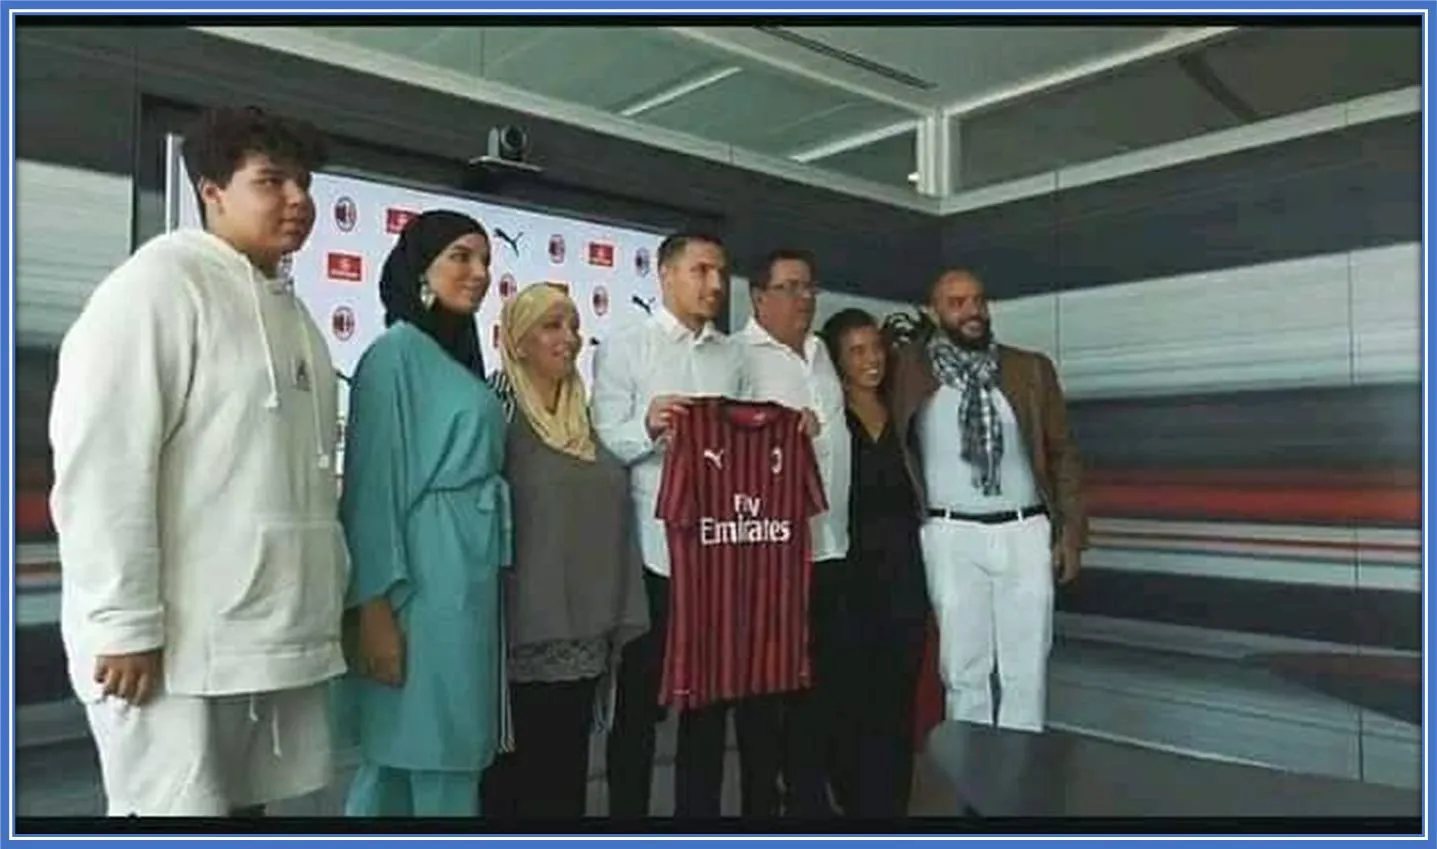 Ismael Bennacer and his family beam with pride as he signs his AC Milan contract, marking a monumental moment in their journey to financial prosperity.